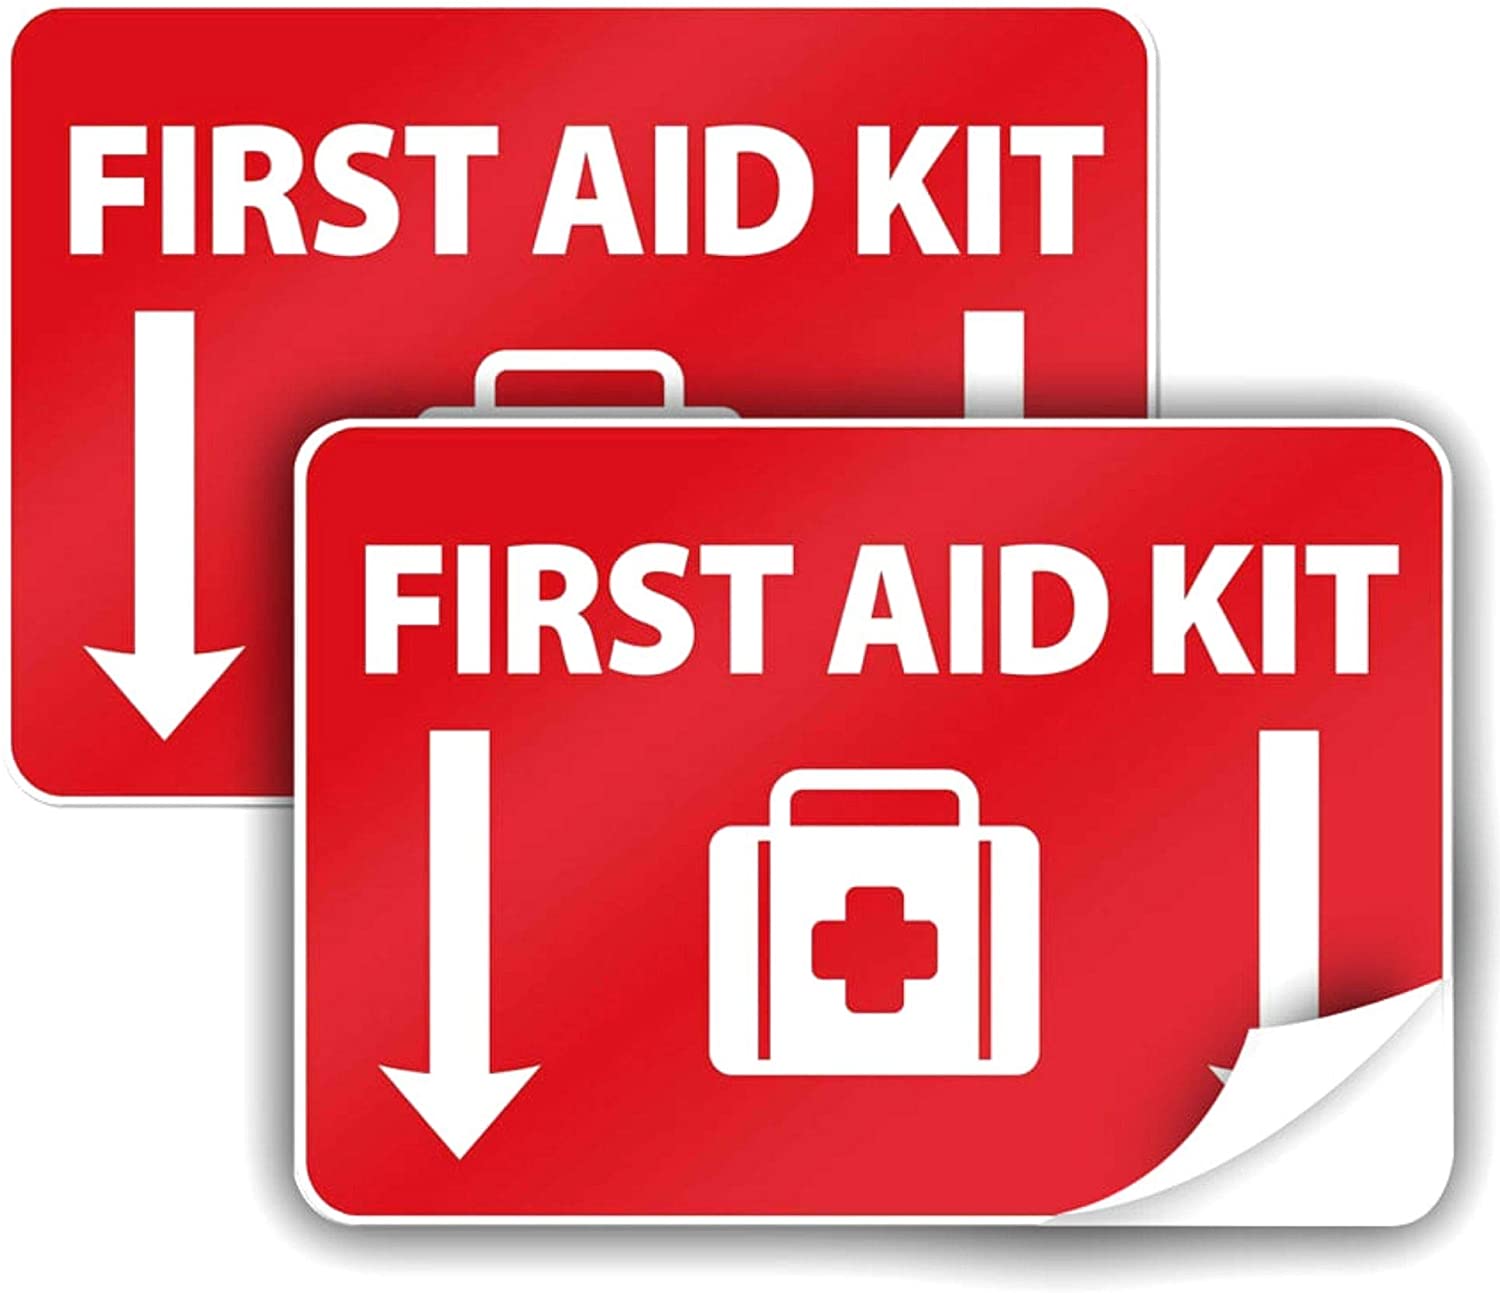 first aid sign